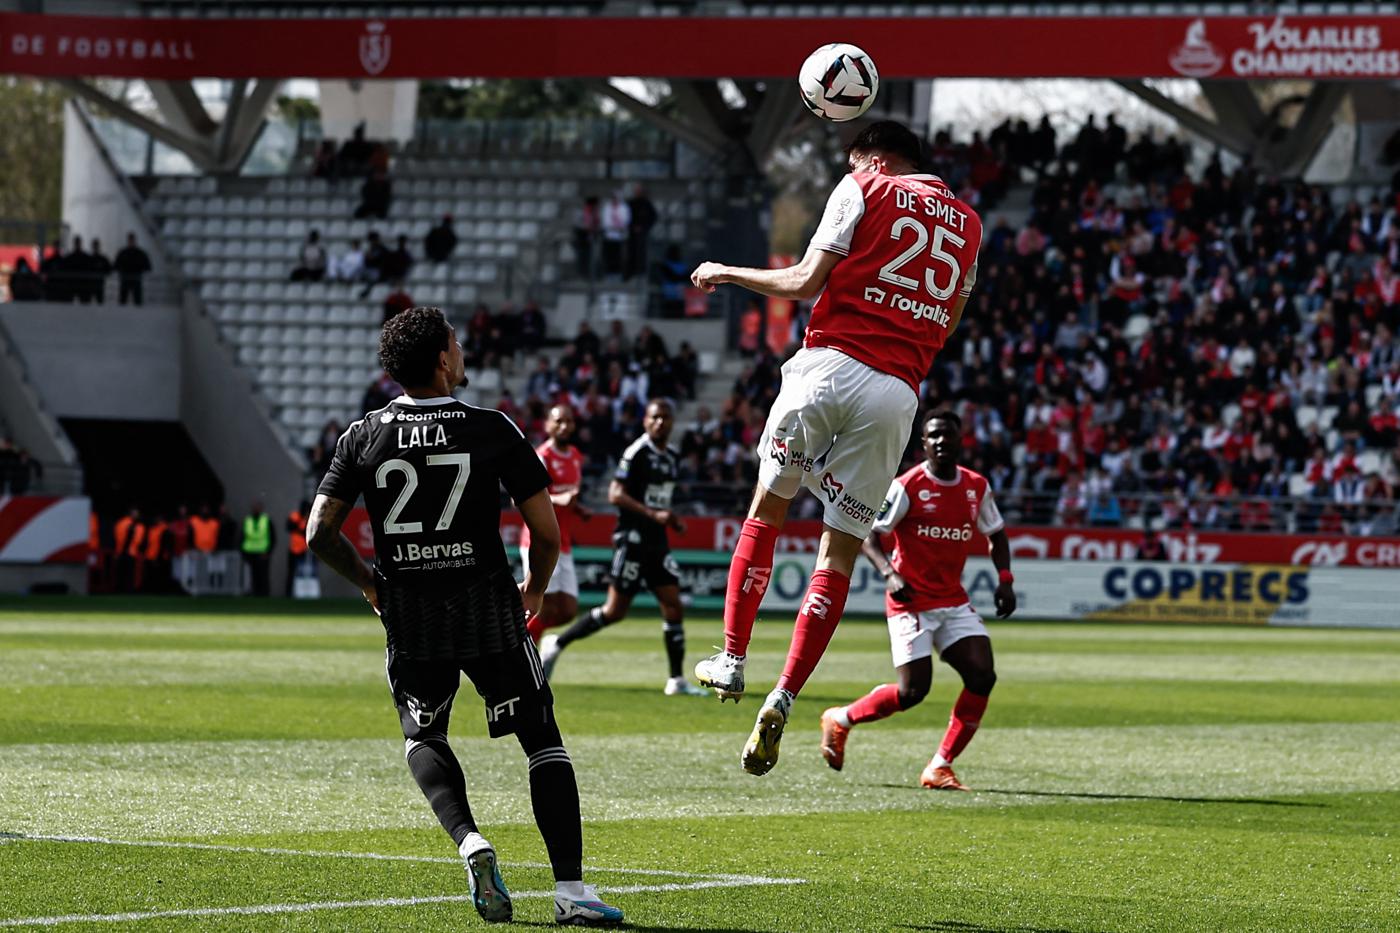 Reims - Brest - 1:1. French Championship, 30th round. Match review, statistics